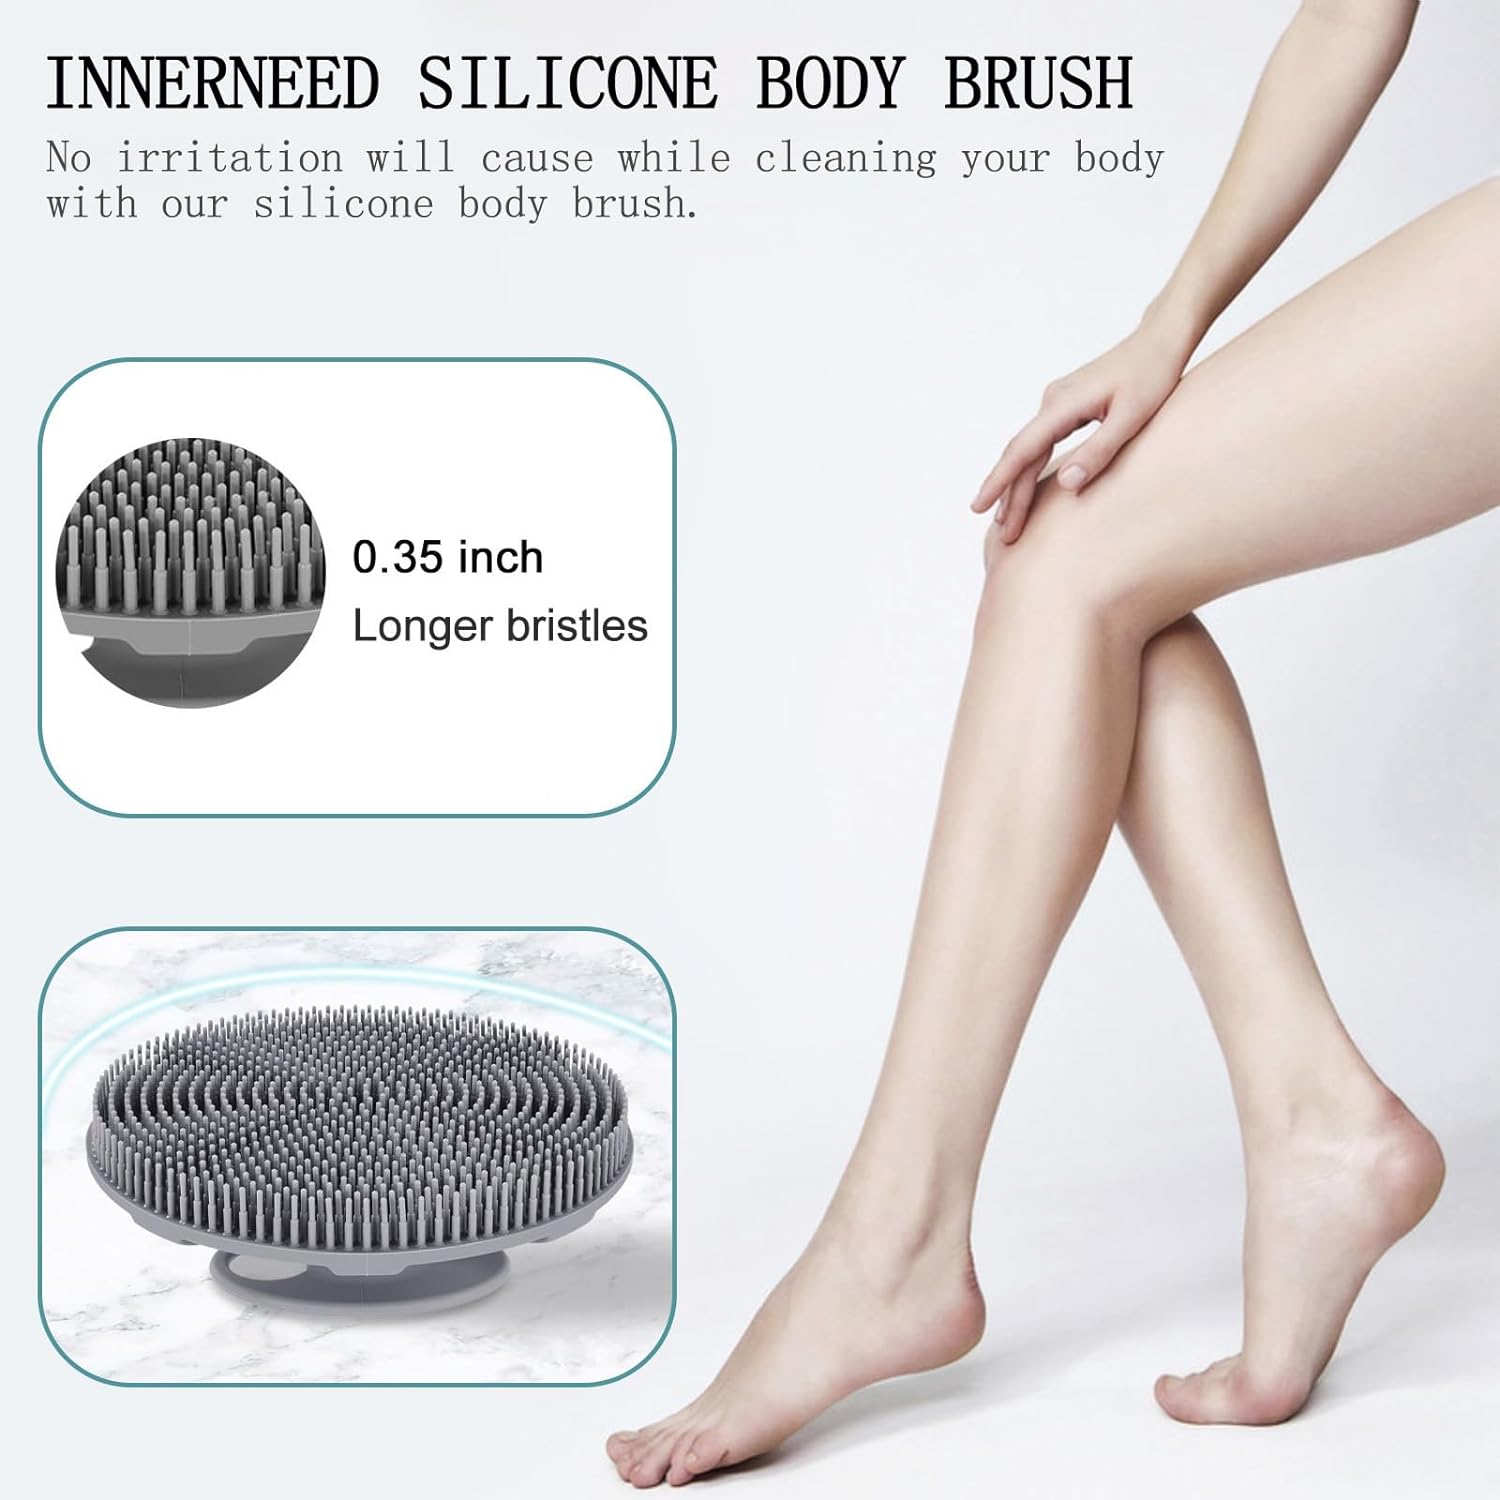 Wholesale prices with free shipping all over United States INNERNEED Food-Grade Soft Silicone Body Scrubber Shower Brush Handheld Cleansing Skin Brush, Gentle Exfoliating and Lather Well (Black) - Steven Deals